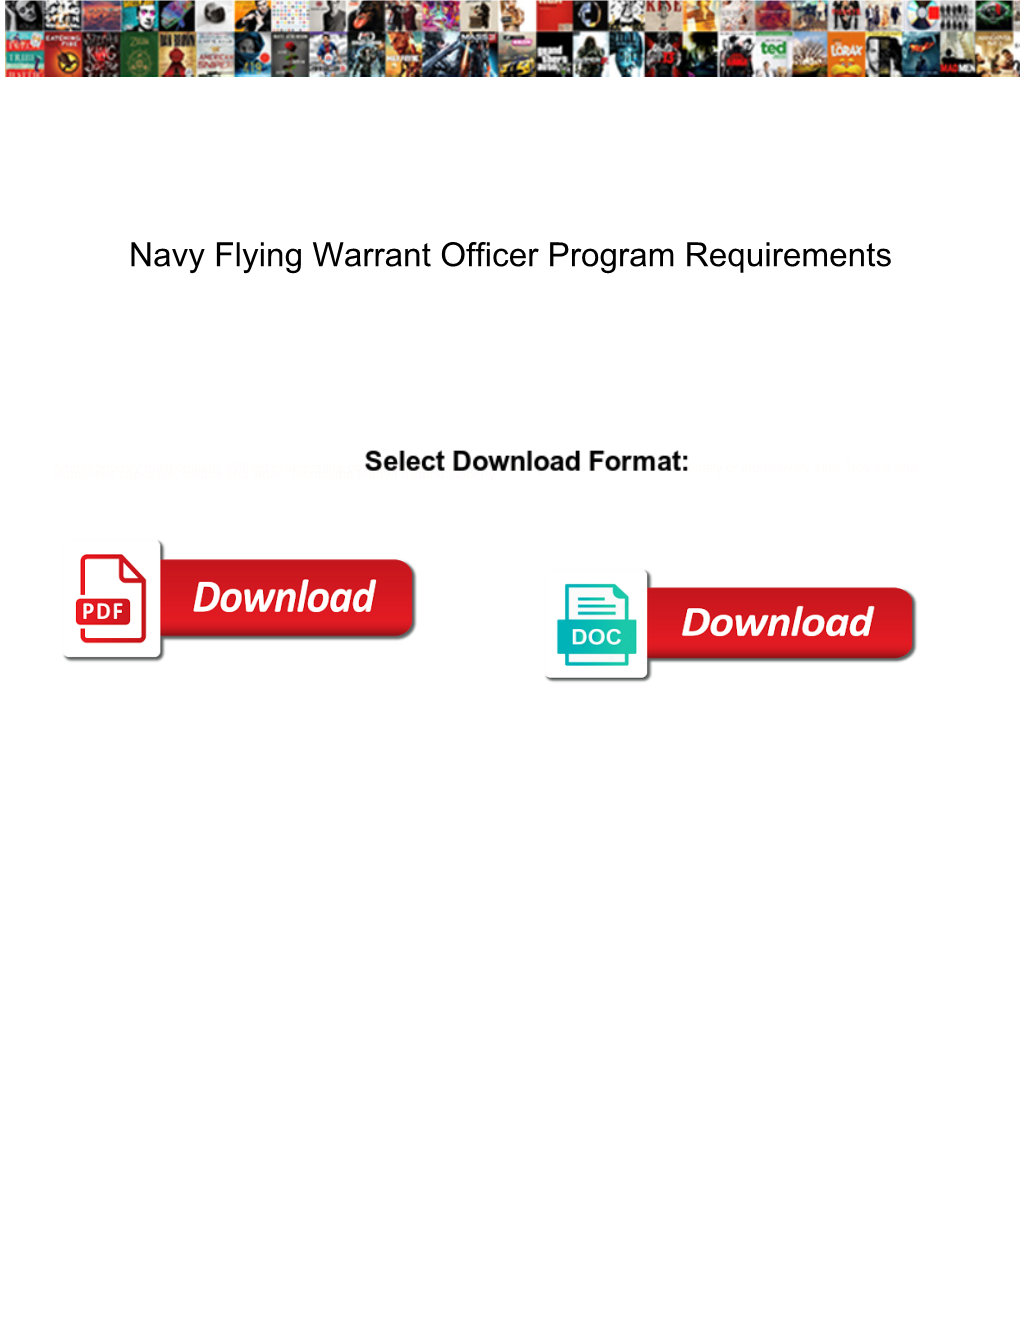 Navy Flying Warrant Officer Program Requirements